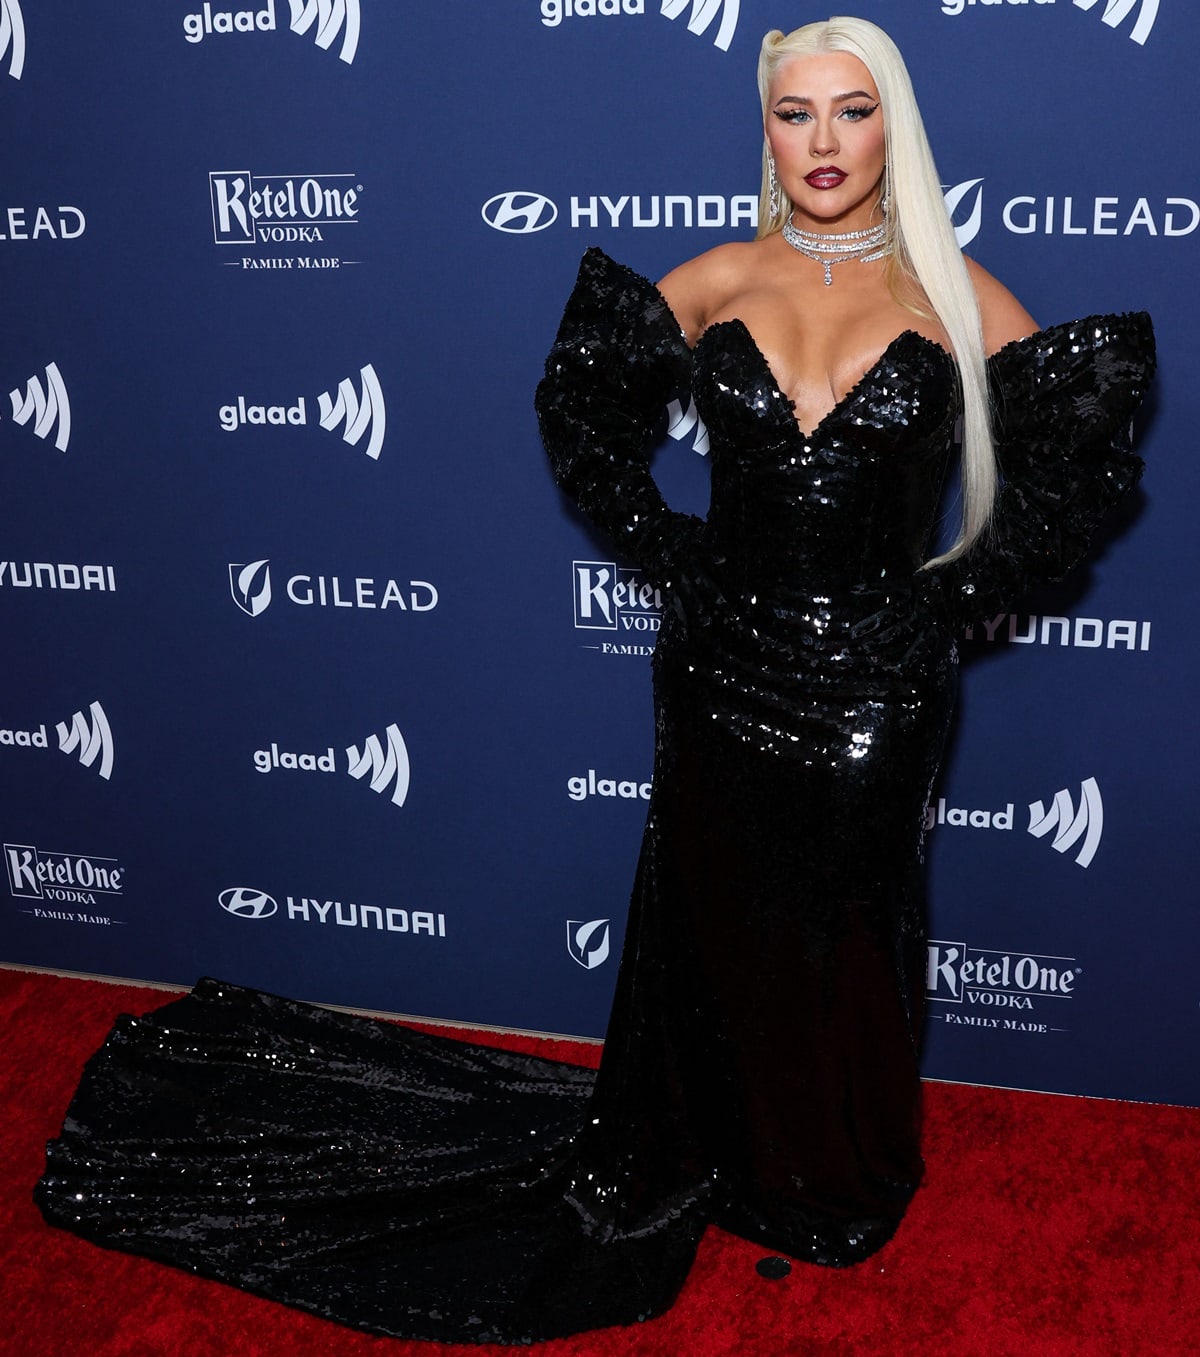 Christina Aguilera dazzled in a stunning black sequined gown with a deep v-cut neckline and a dramatic train that flowed gracefully to the floor